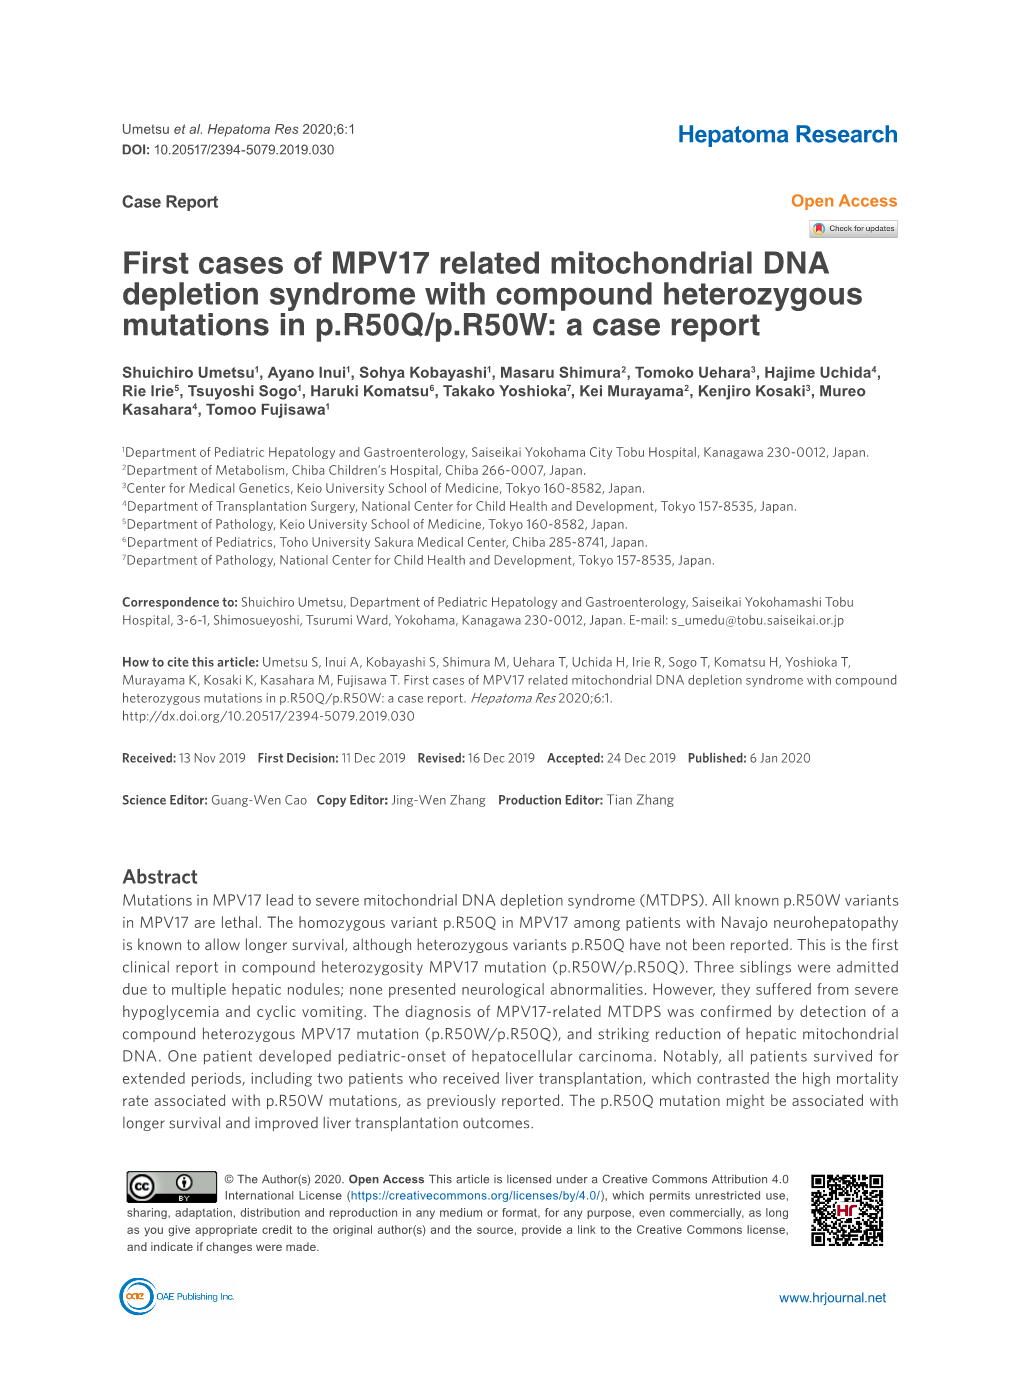 First Cases of MPV17 Related Mitochondrial DNA Depletion Syndrome with Compound Heterozygous Mutations in P.R50Q/P.R50W: a Case Report